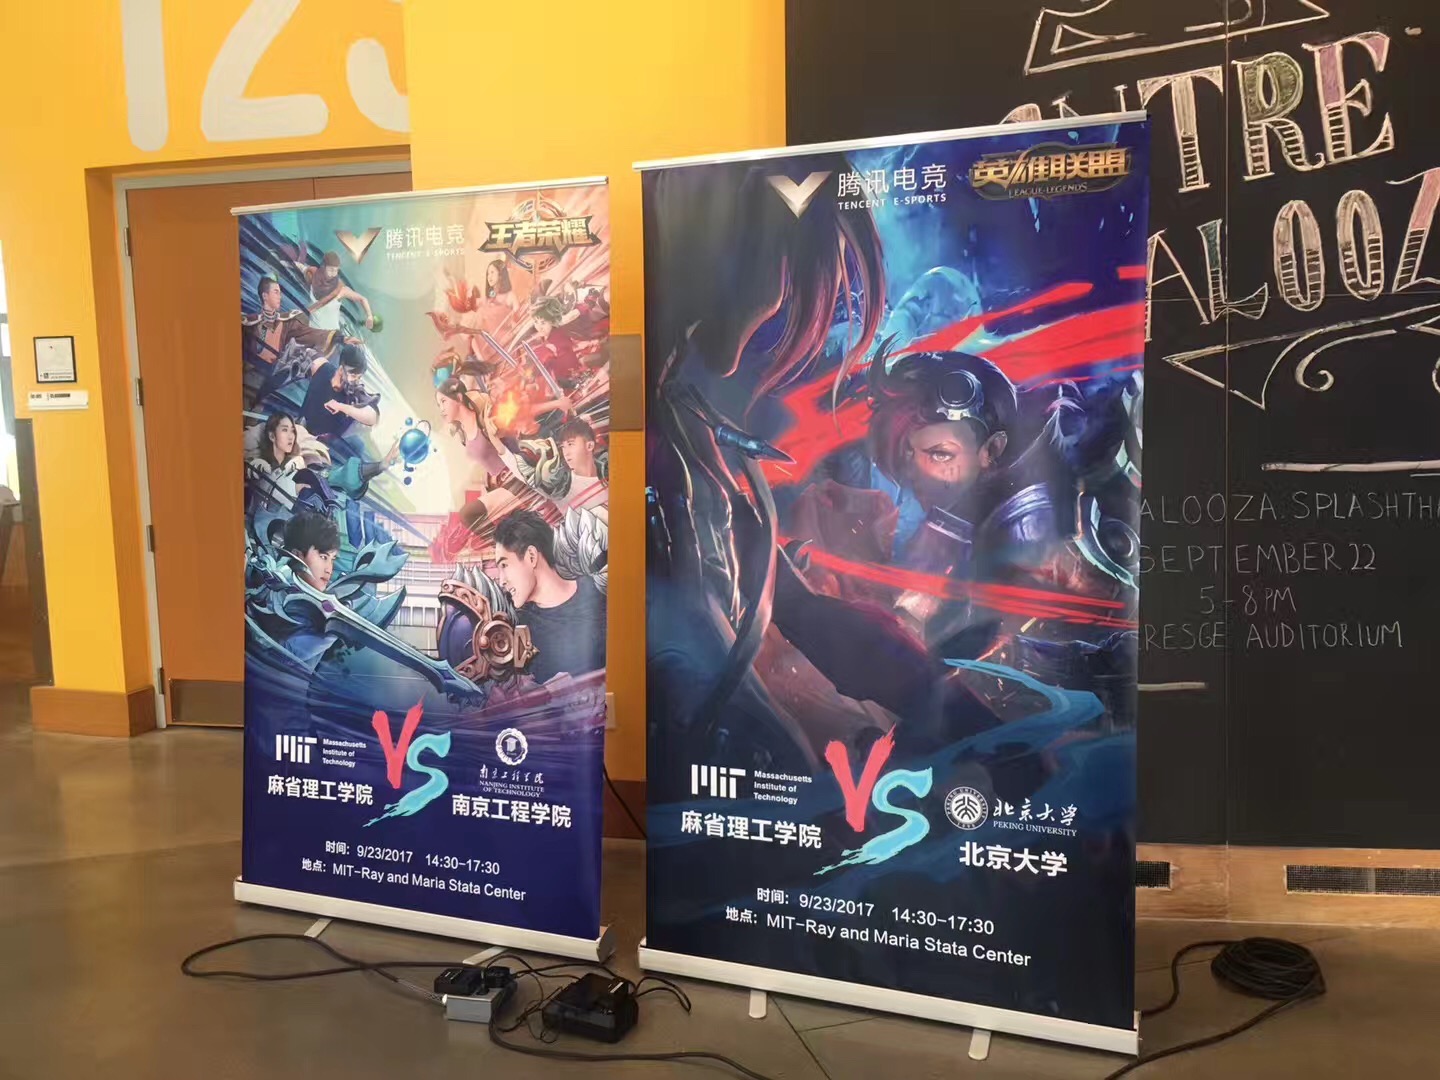 Tencent visits MIT for an esports cultural exchange